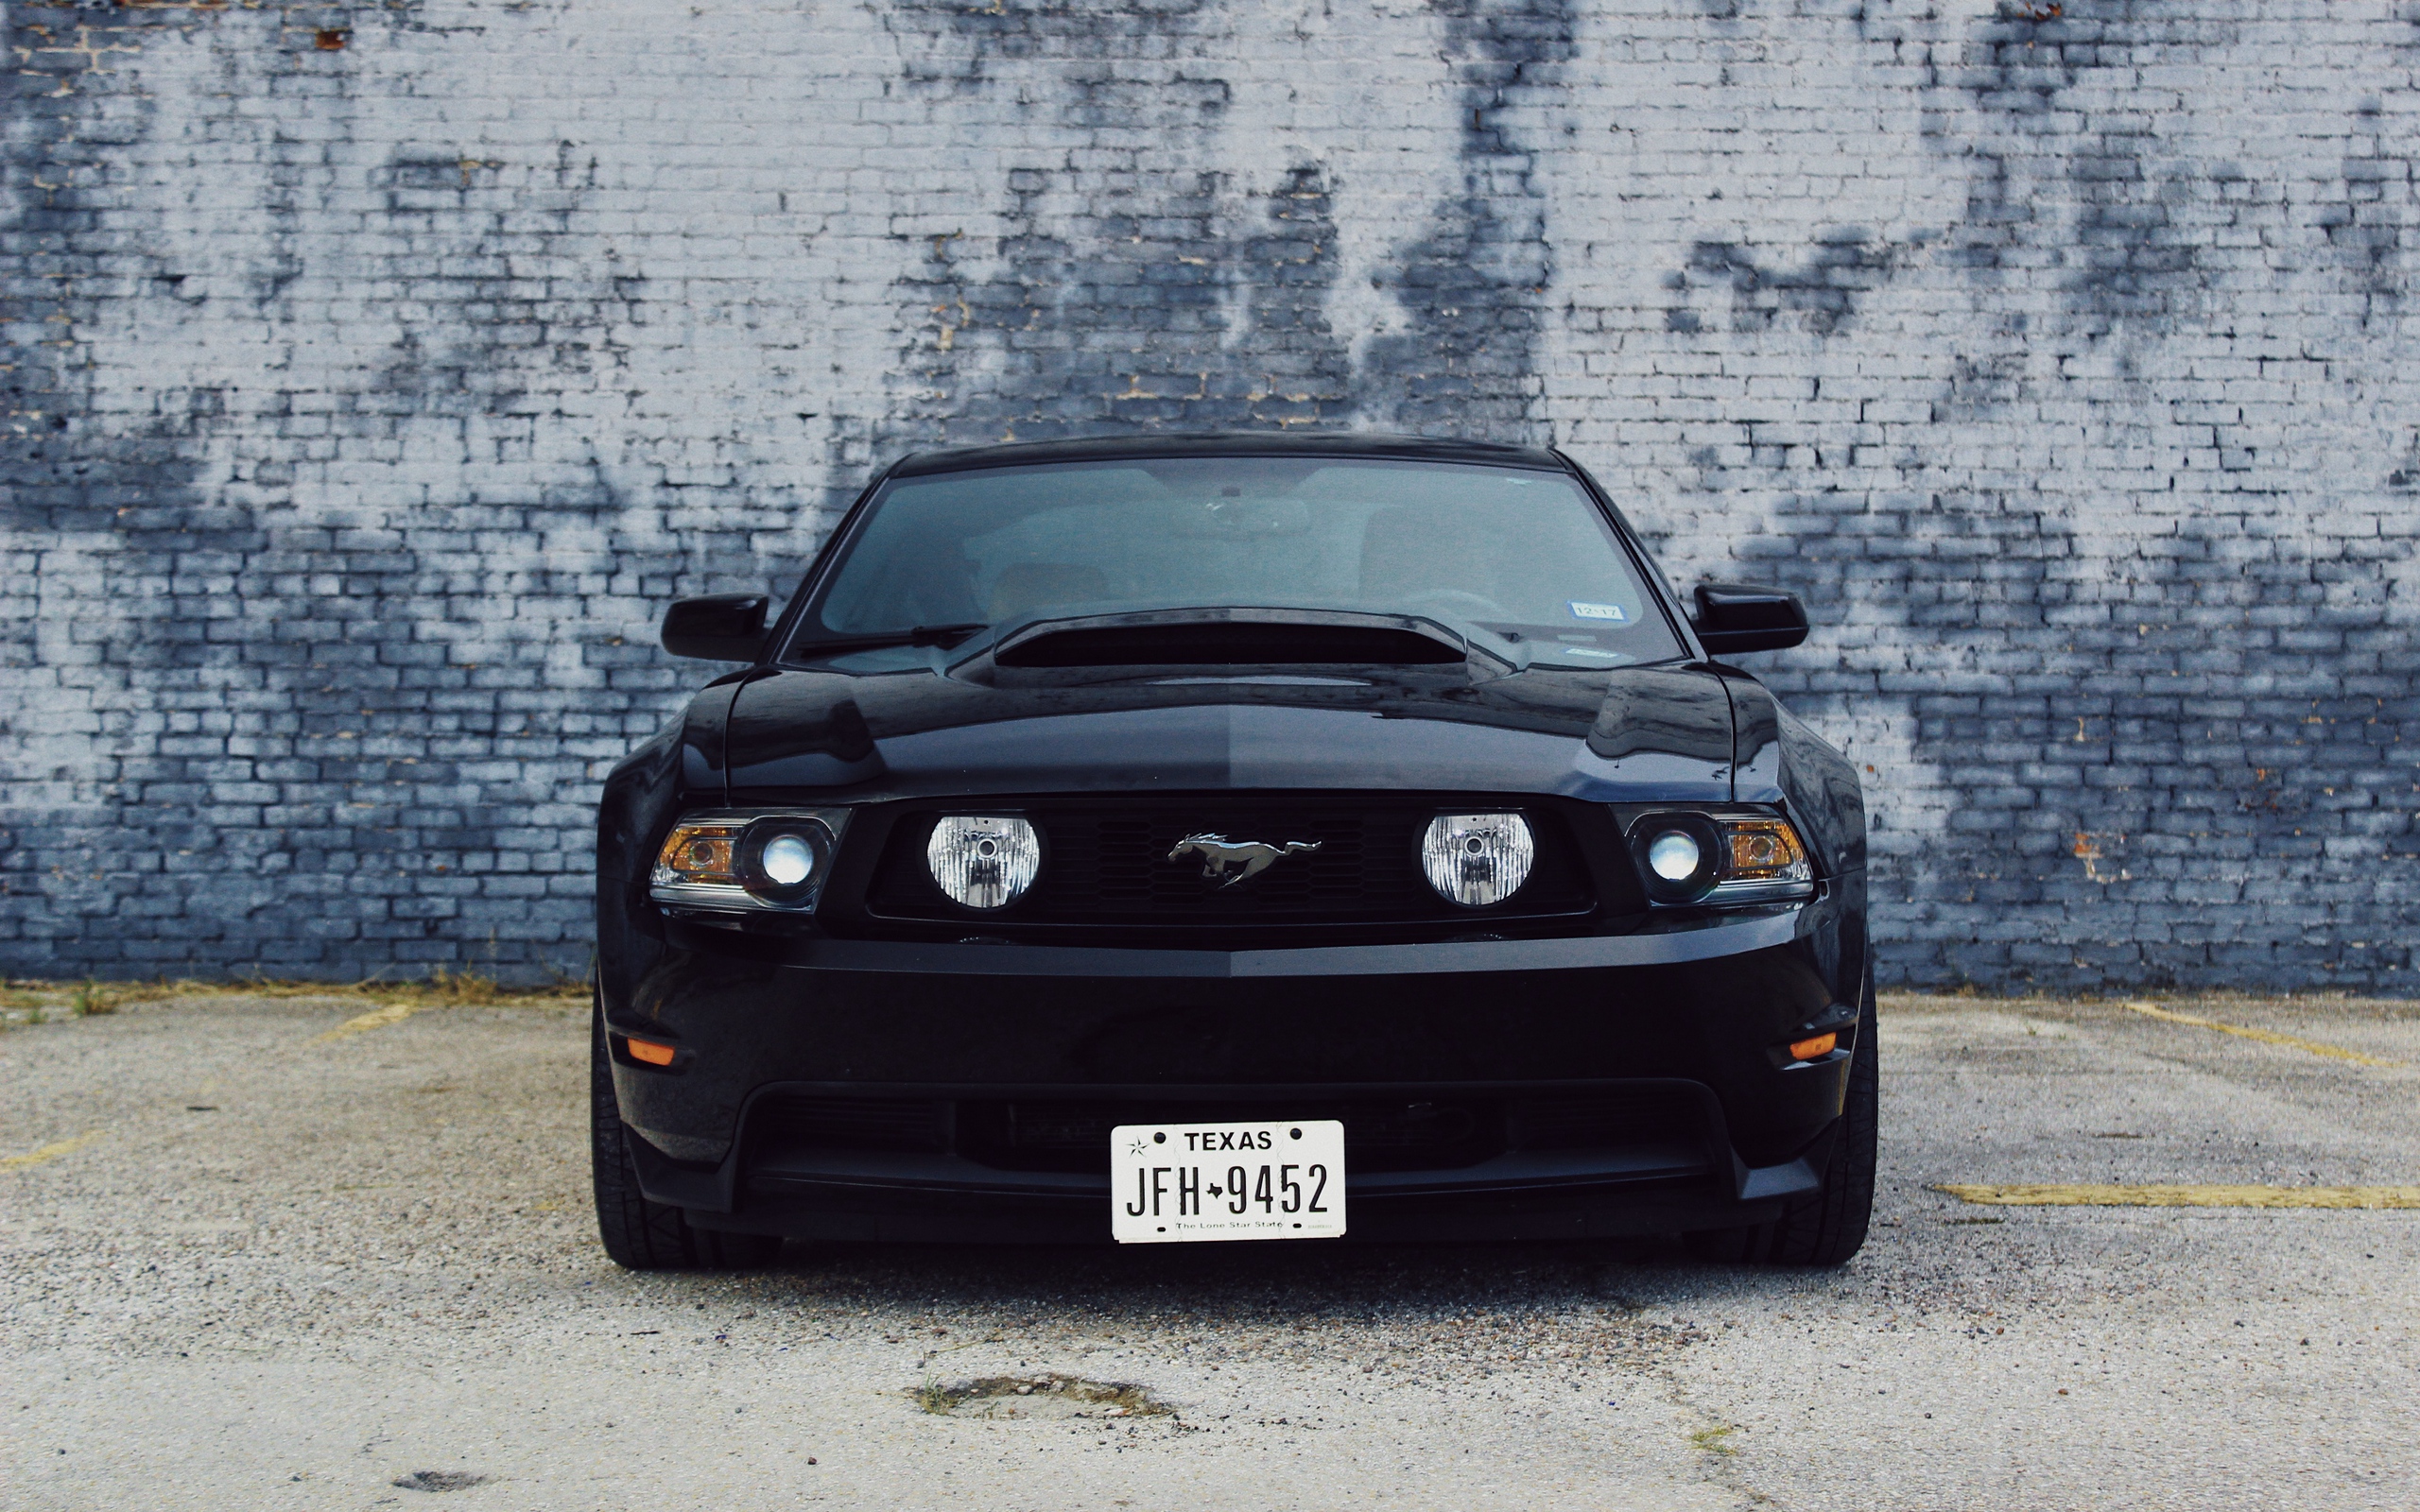 Wallpaper of Ford Mustang, Car, Black, Front View background & HD image